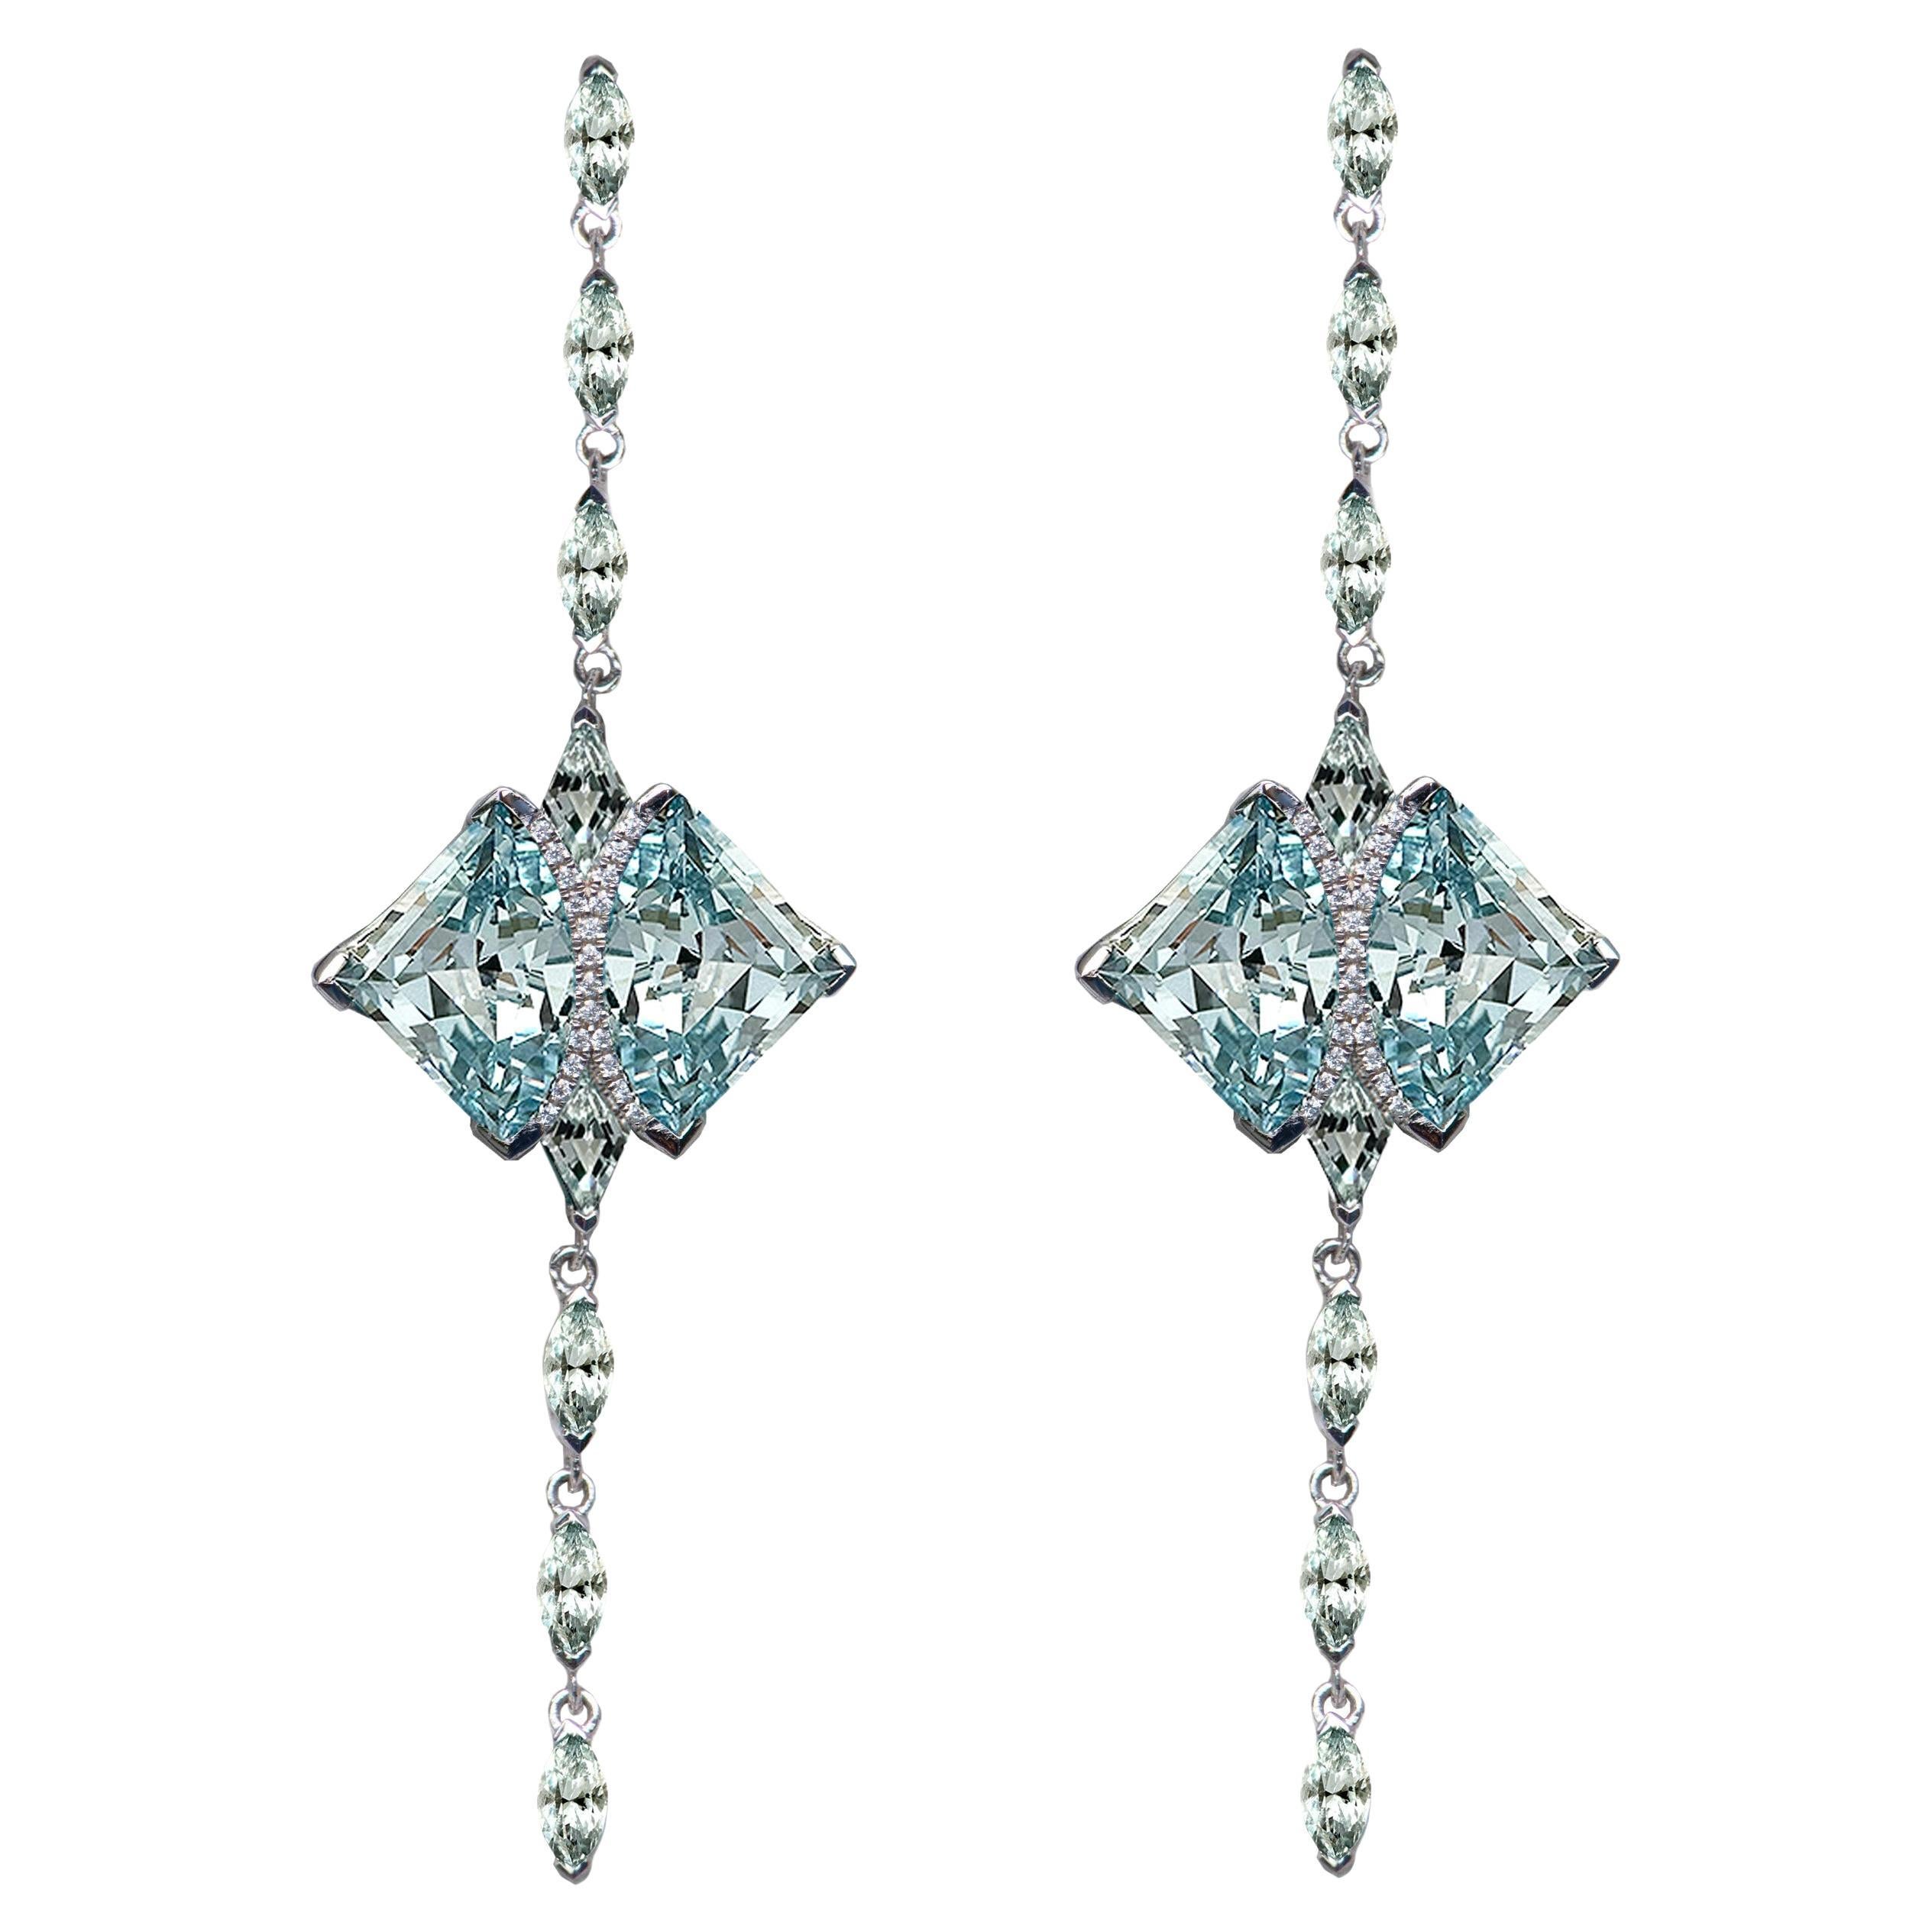 The 20ct Aquamarine Eagle Ray Earrings, 18Kt White Gold For Sale